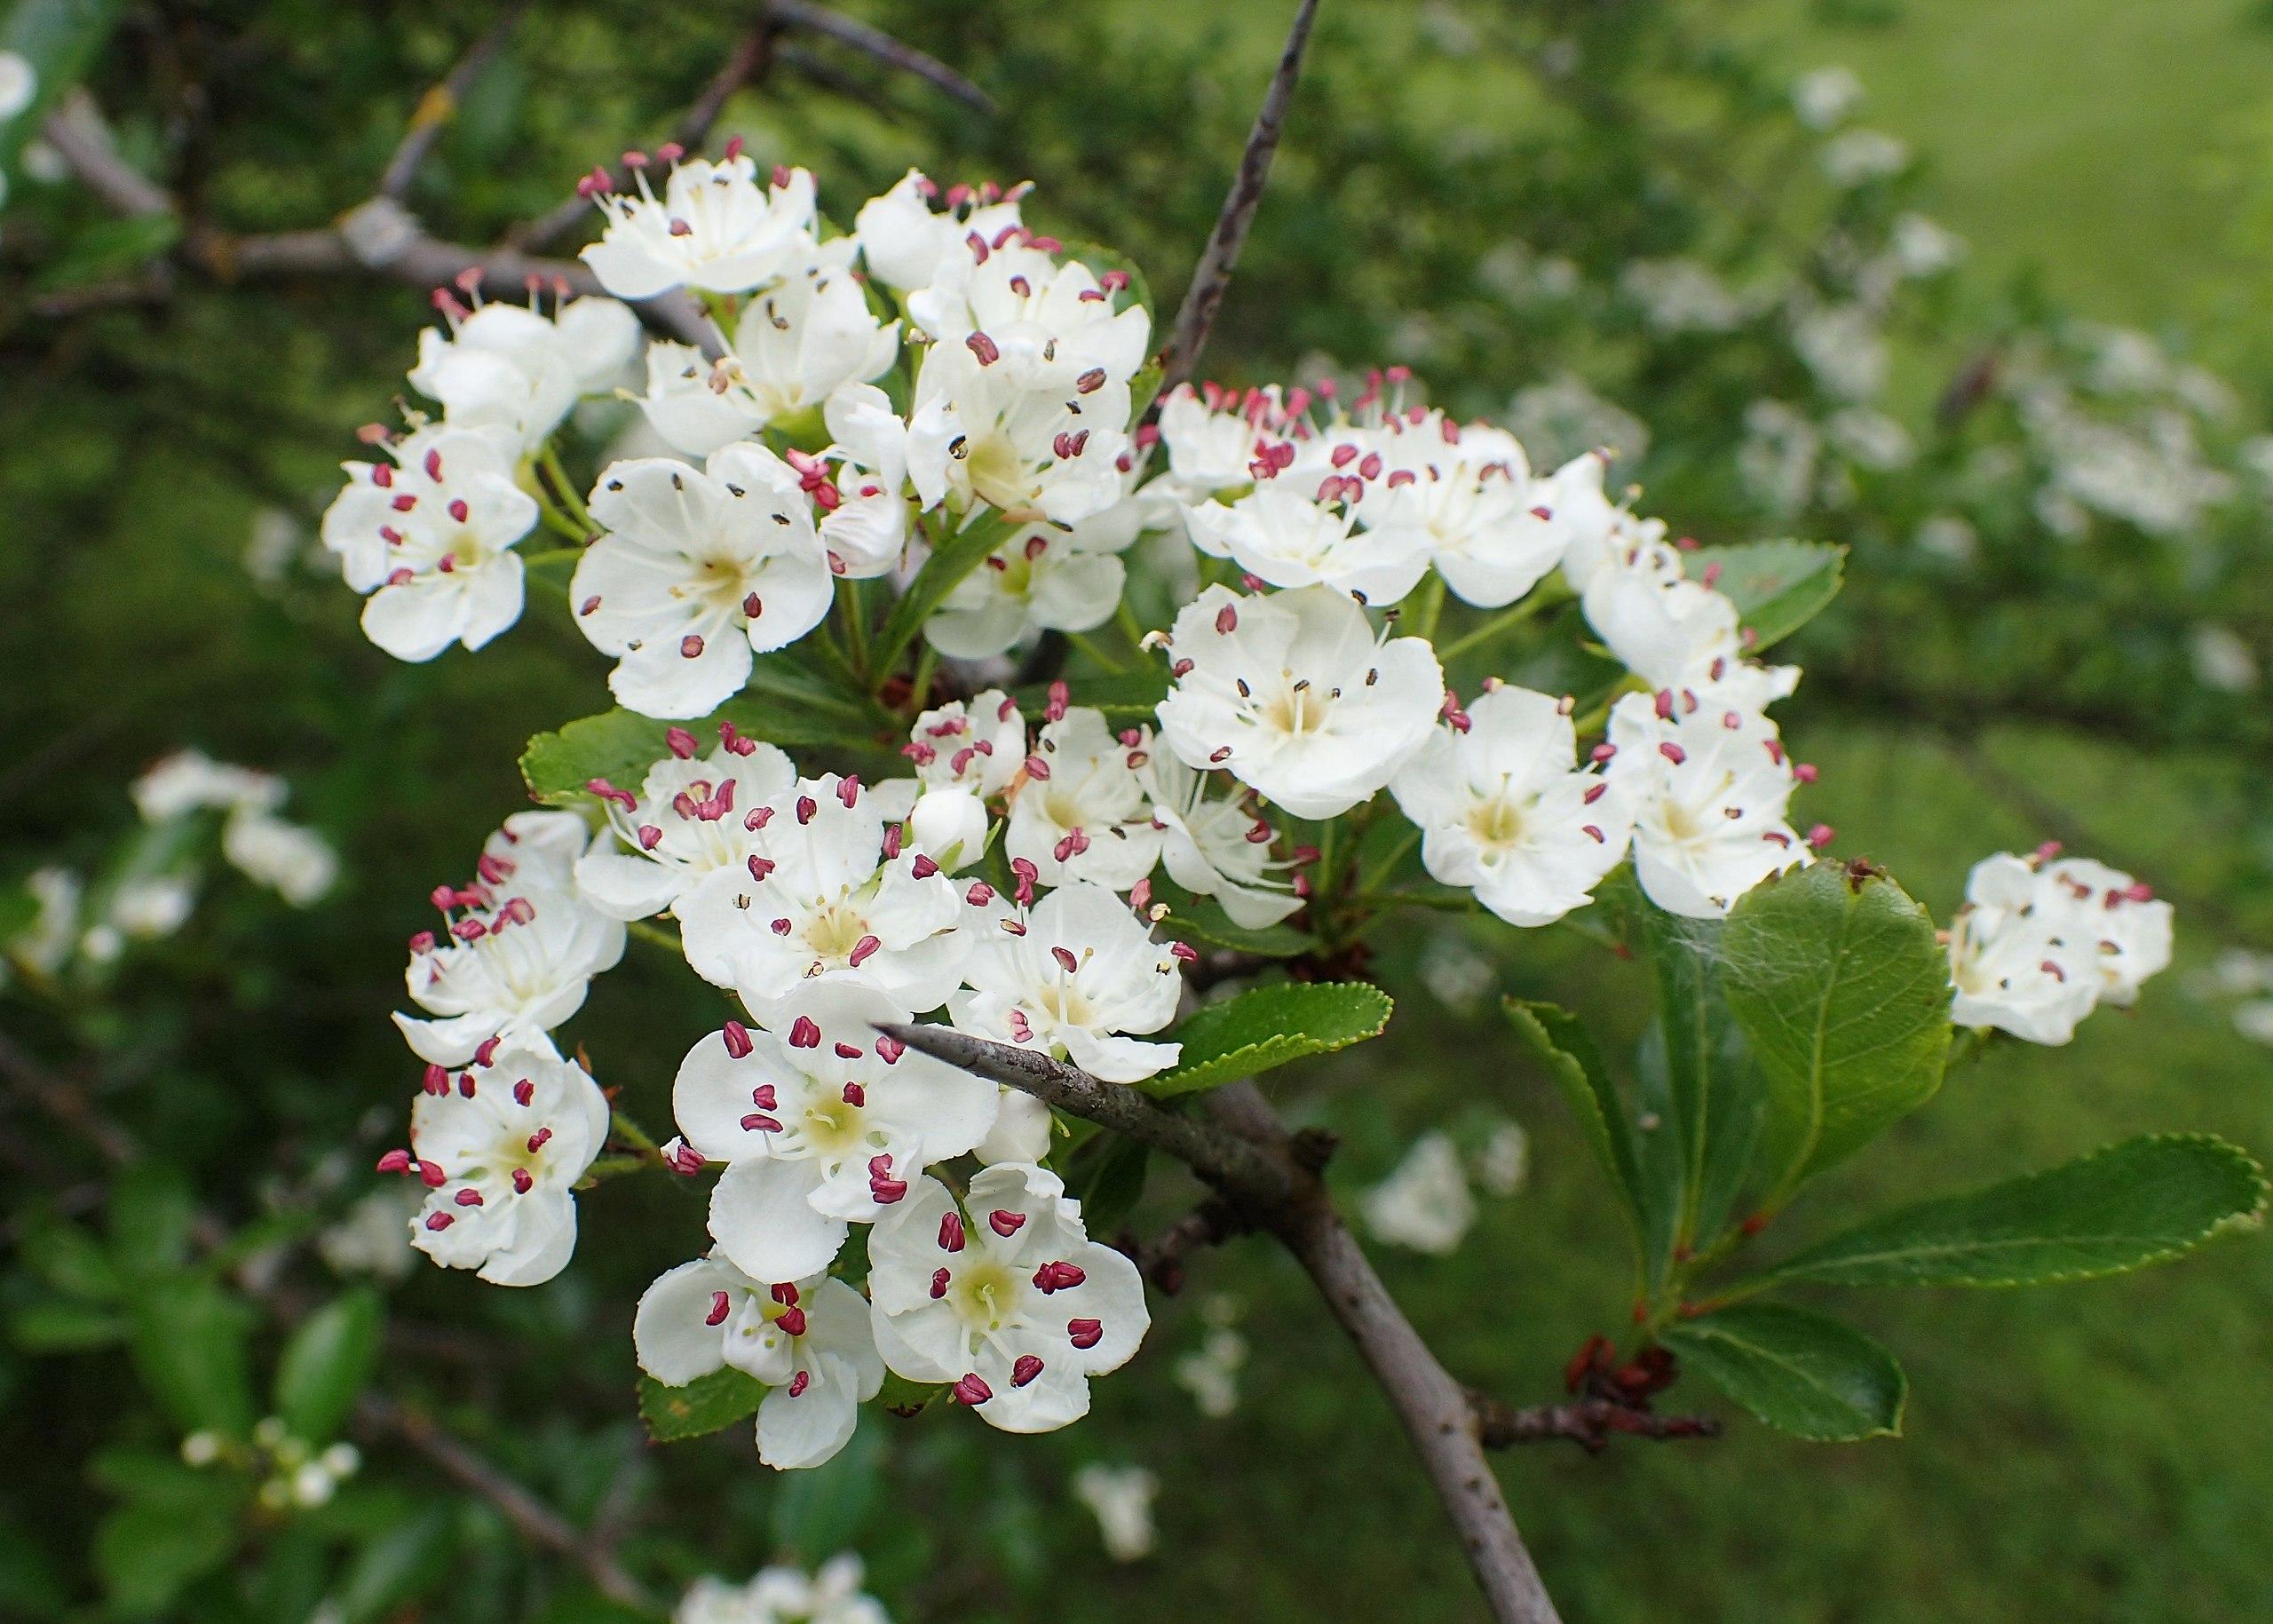 white flowers with white filaments, pink anthers, beige center, lime-green leaves and gray-brown branches